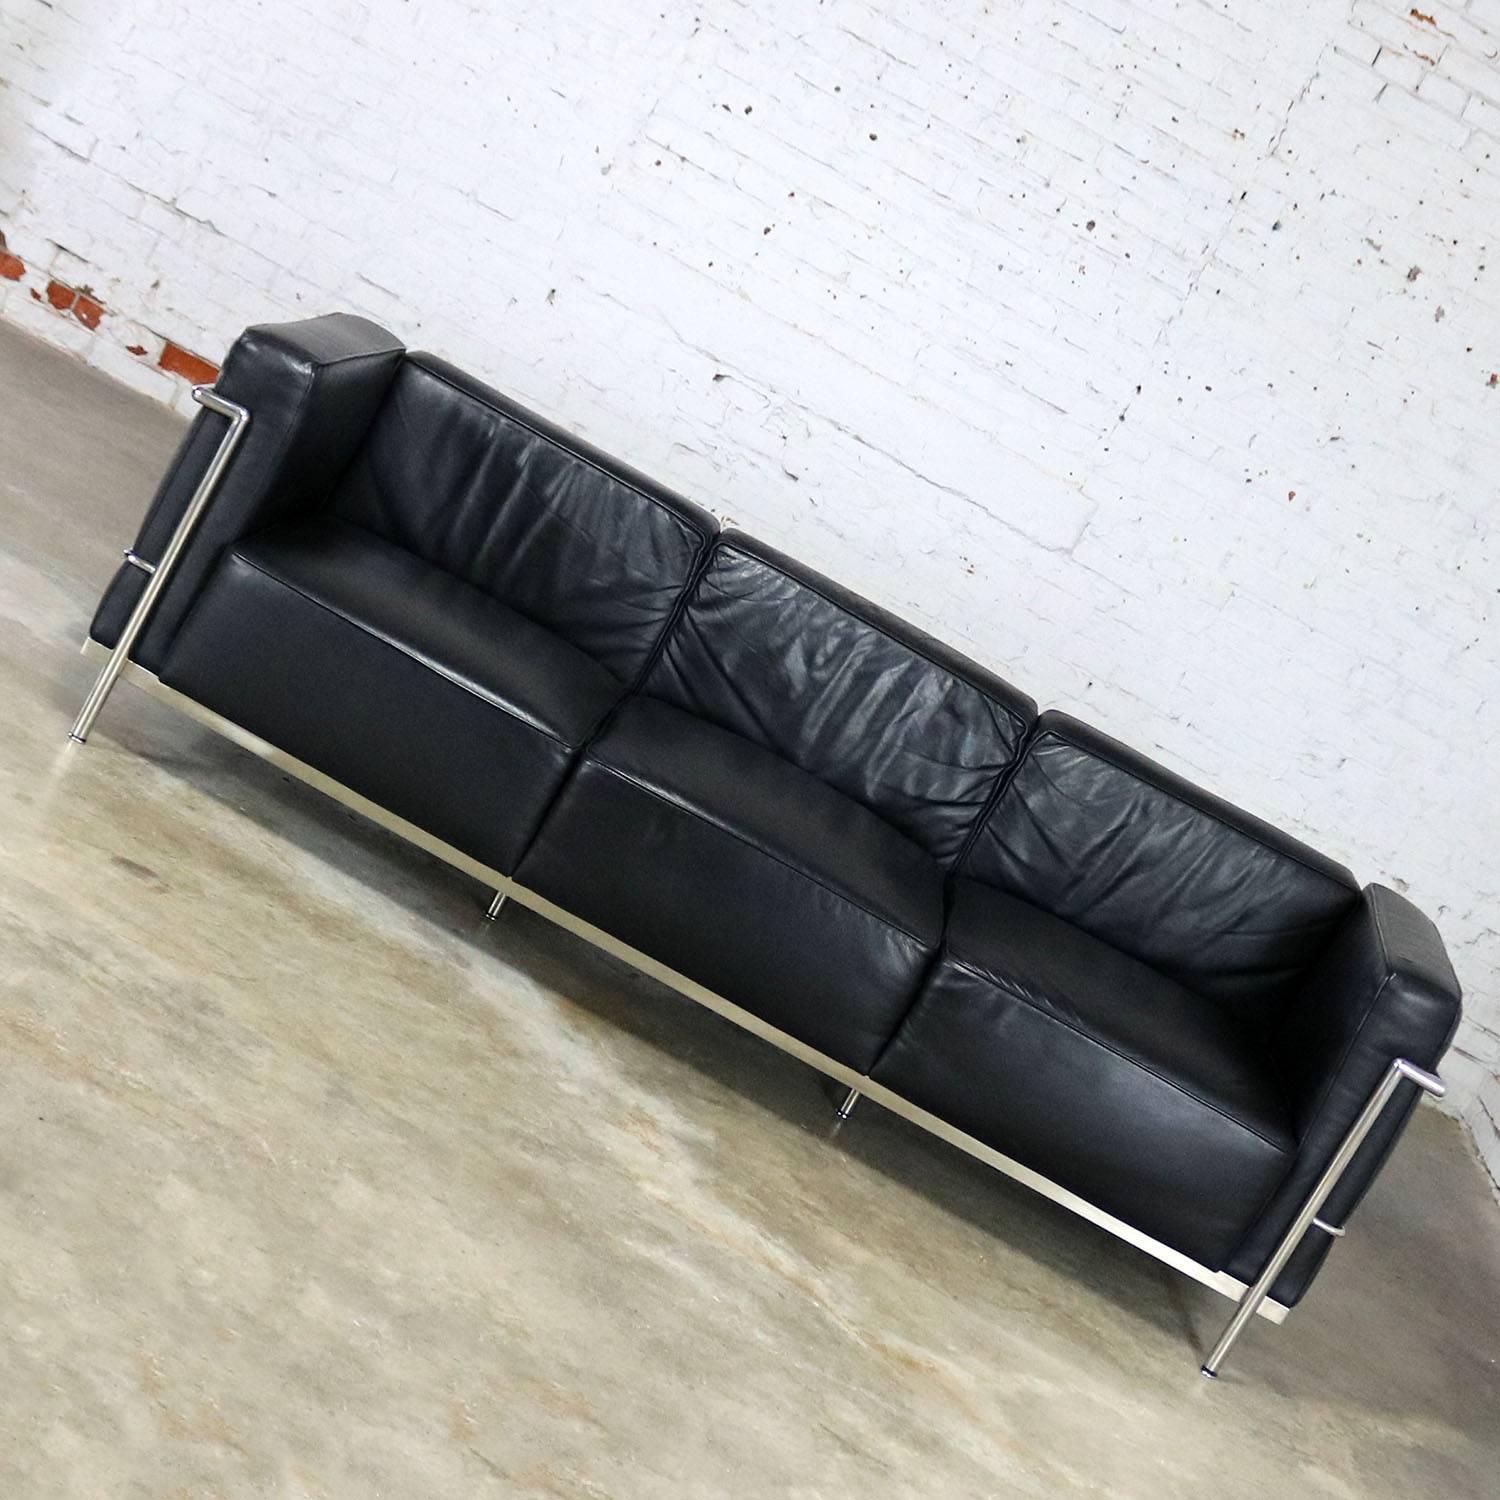 Great black leather three seat sofa in the style of Le Corbusier LC3 Grand Comfort chairs. This one produced by Alphaville Design. It is in wonderful condition and circa 2007.

Superbly done in the style of Le Corbusier’s LC3 Grand Comfort sofa